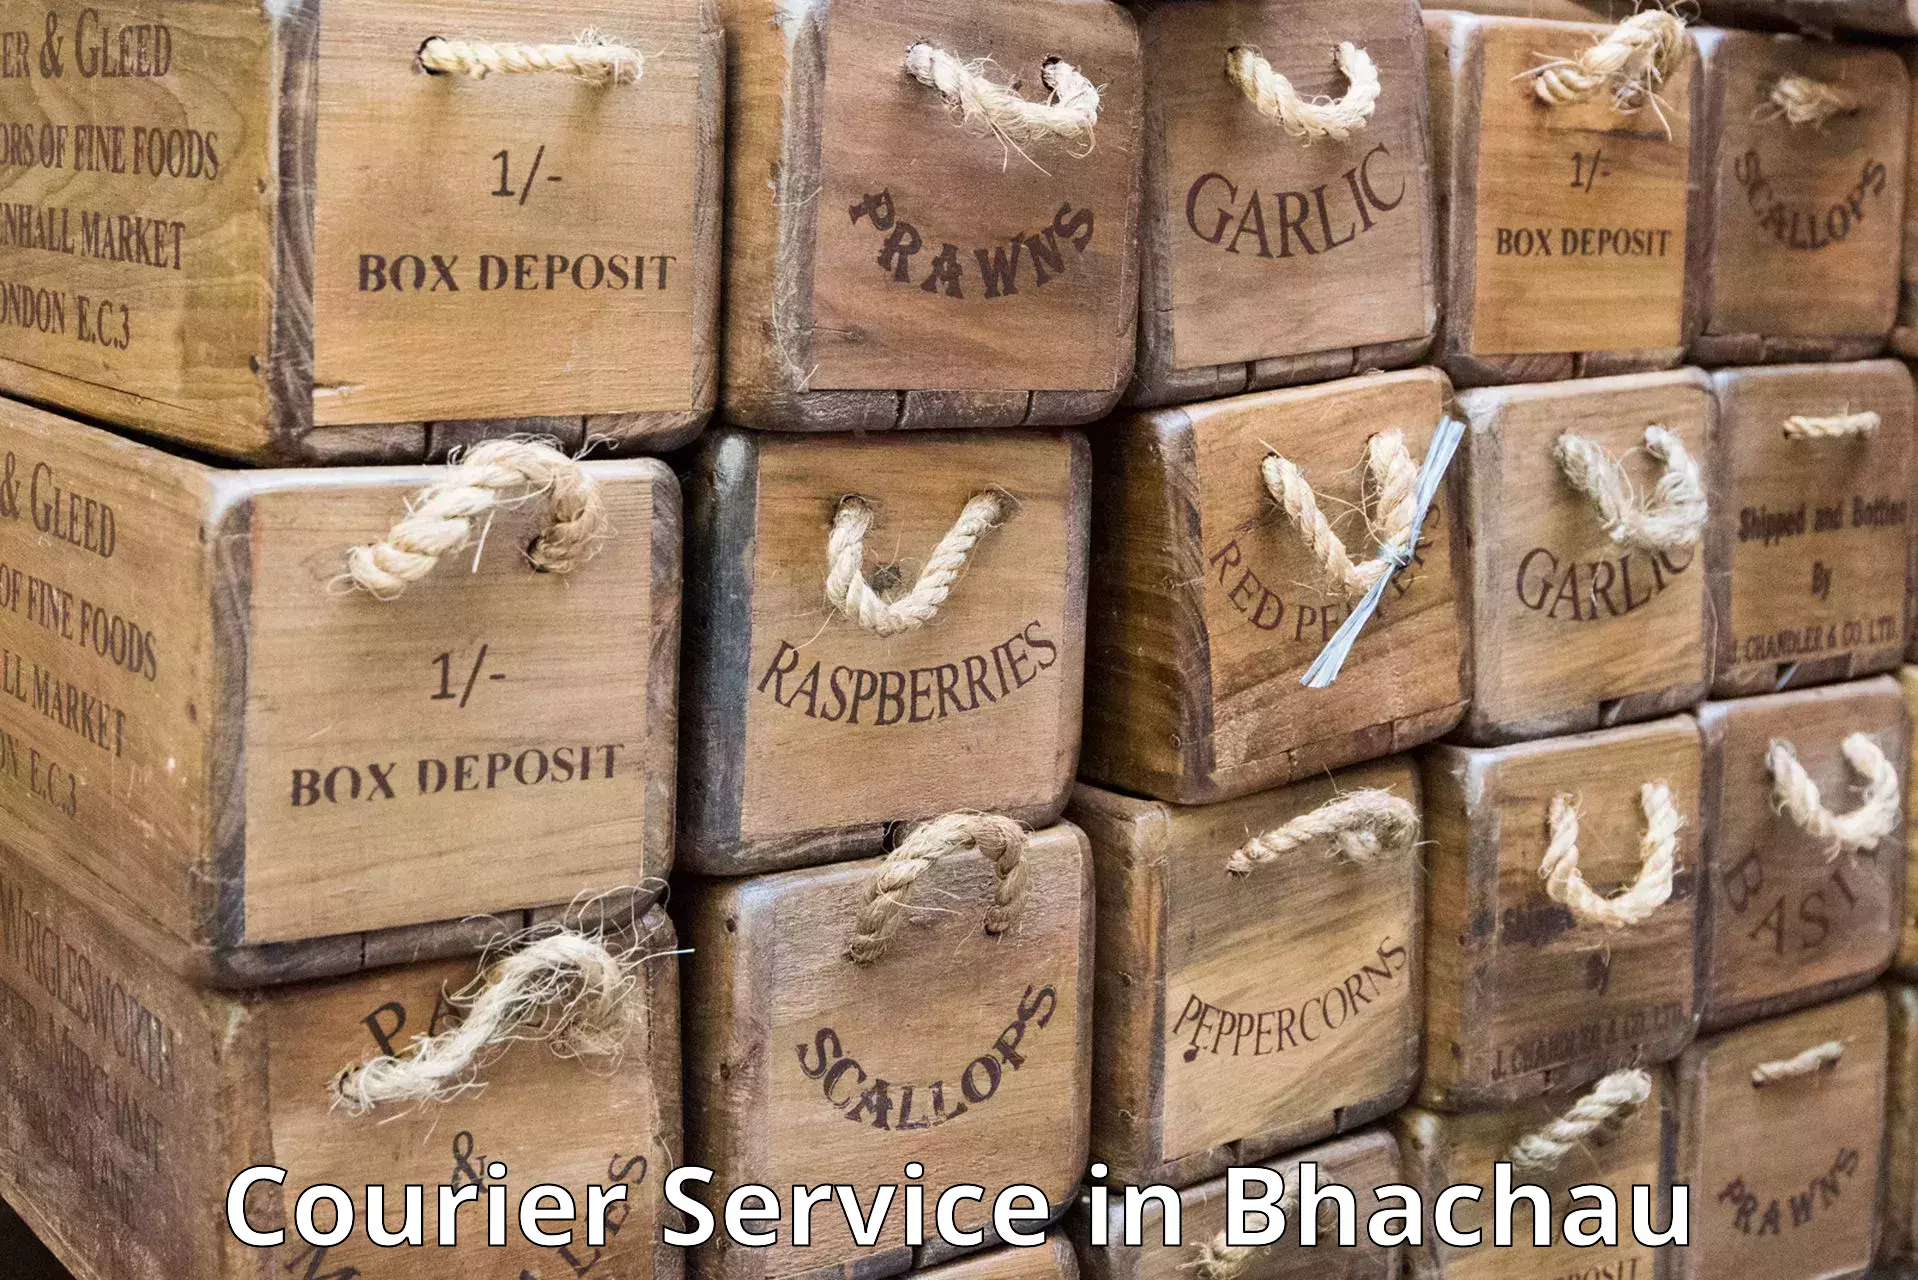 Reliable package handling in Bhachau